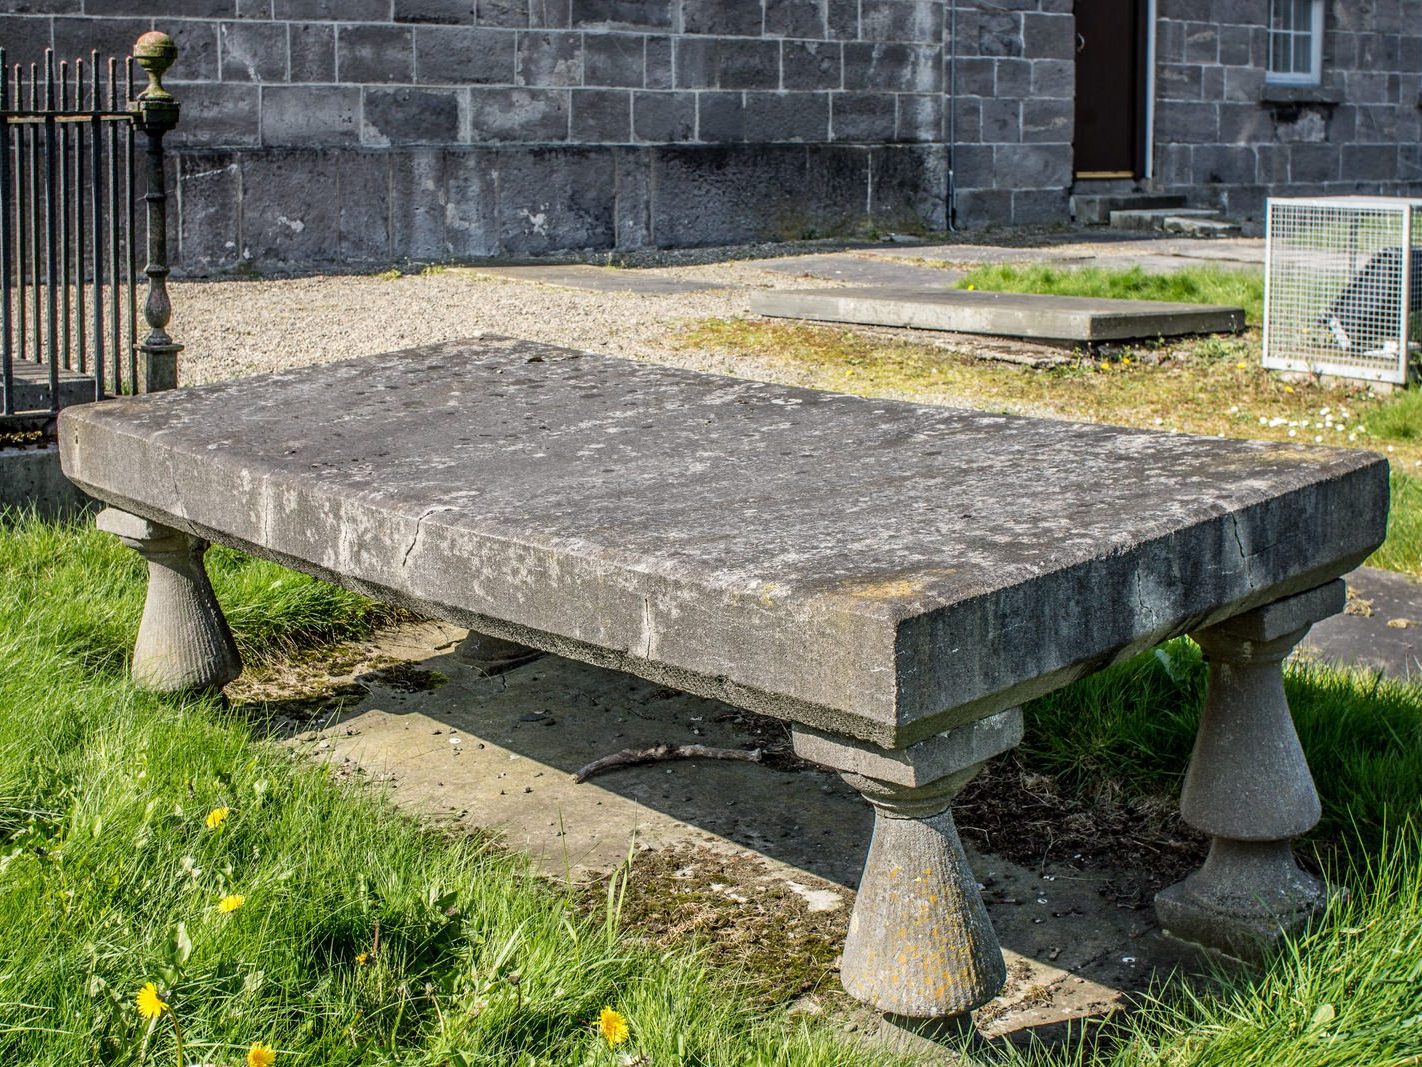 SOME OLD IMAGES OF ST PETERS CHURCHYARD IN DROGHEDA [PHOTOGRAPHED 20212]-224232-1